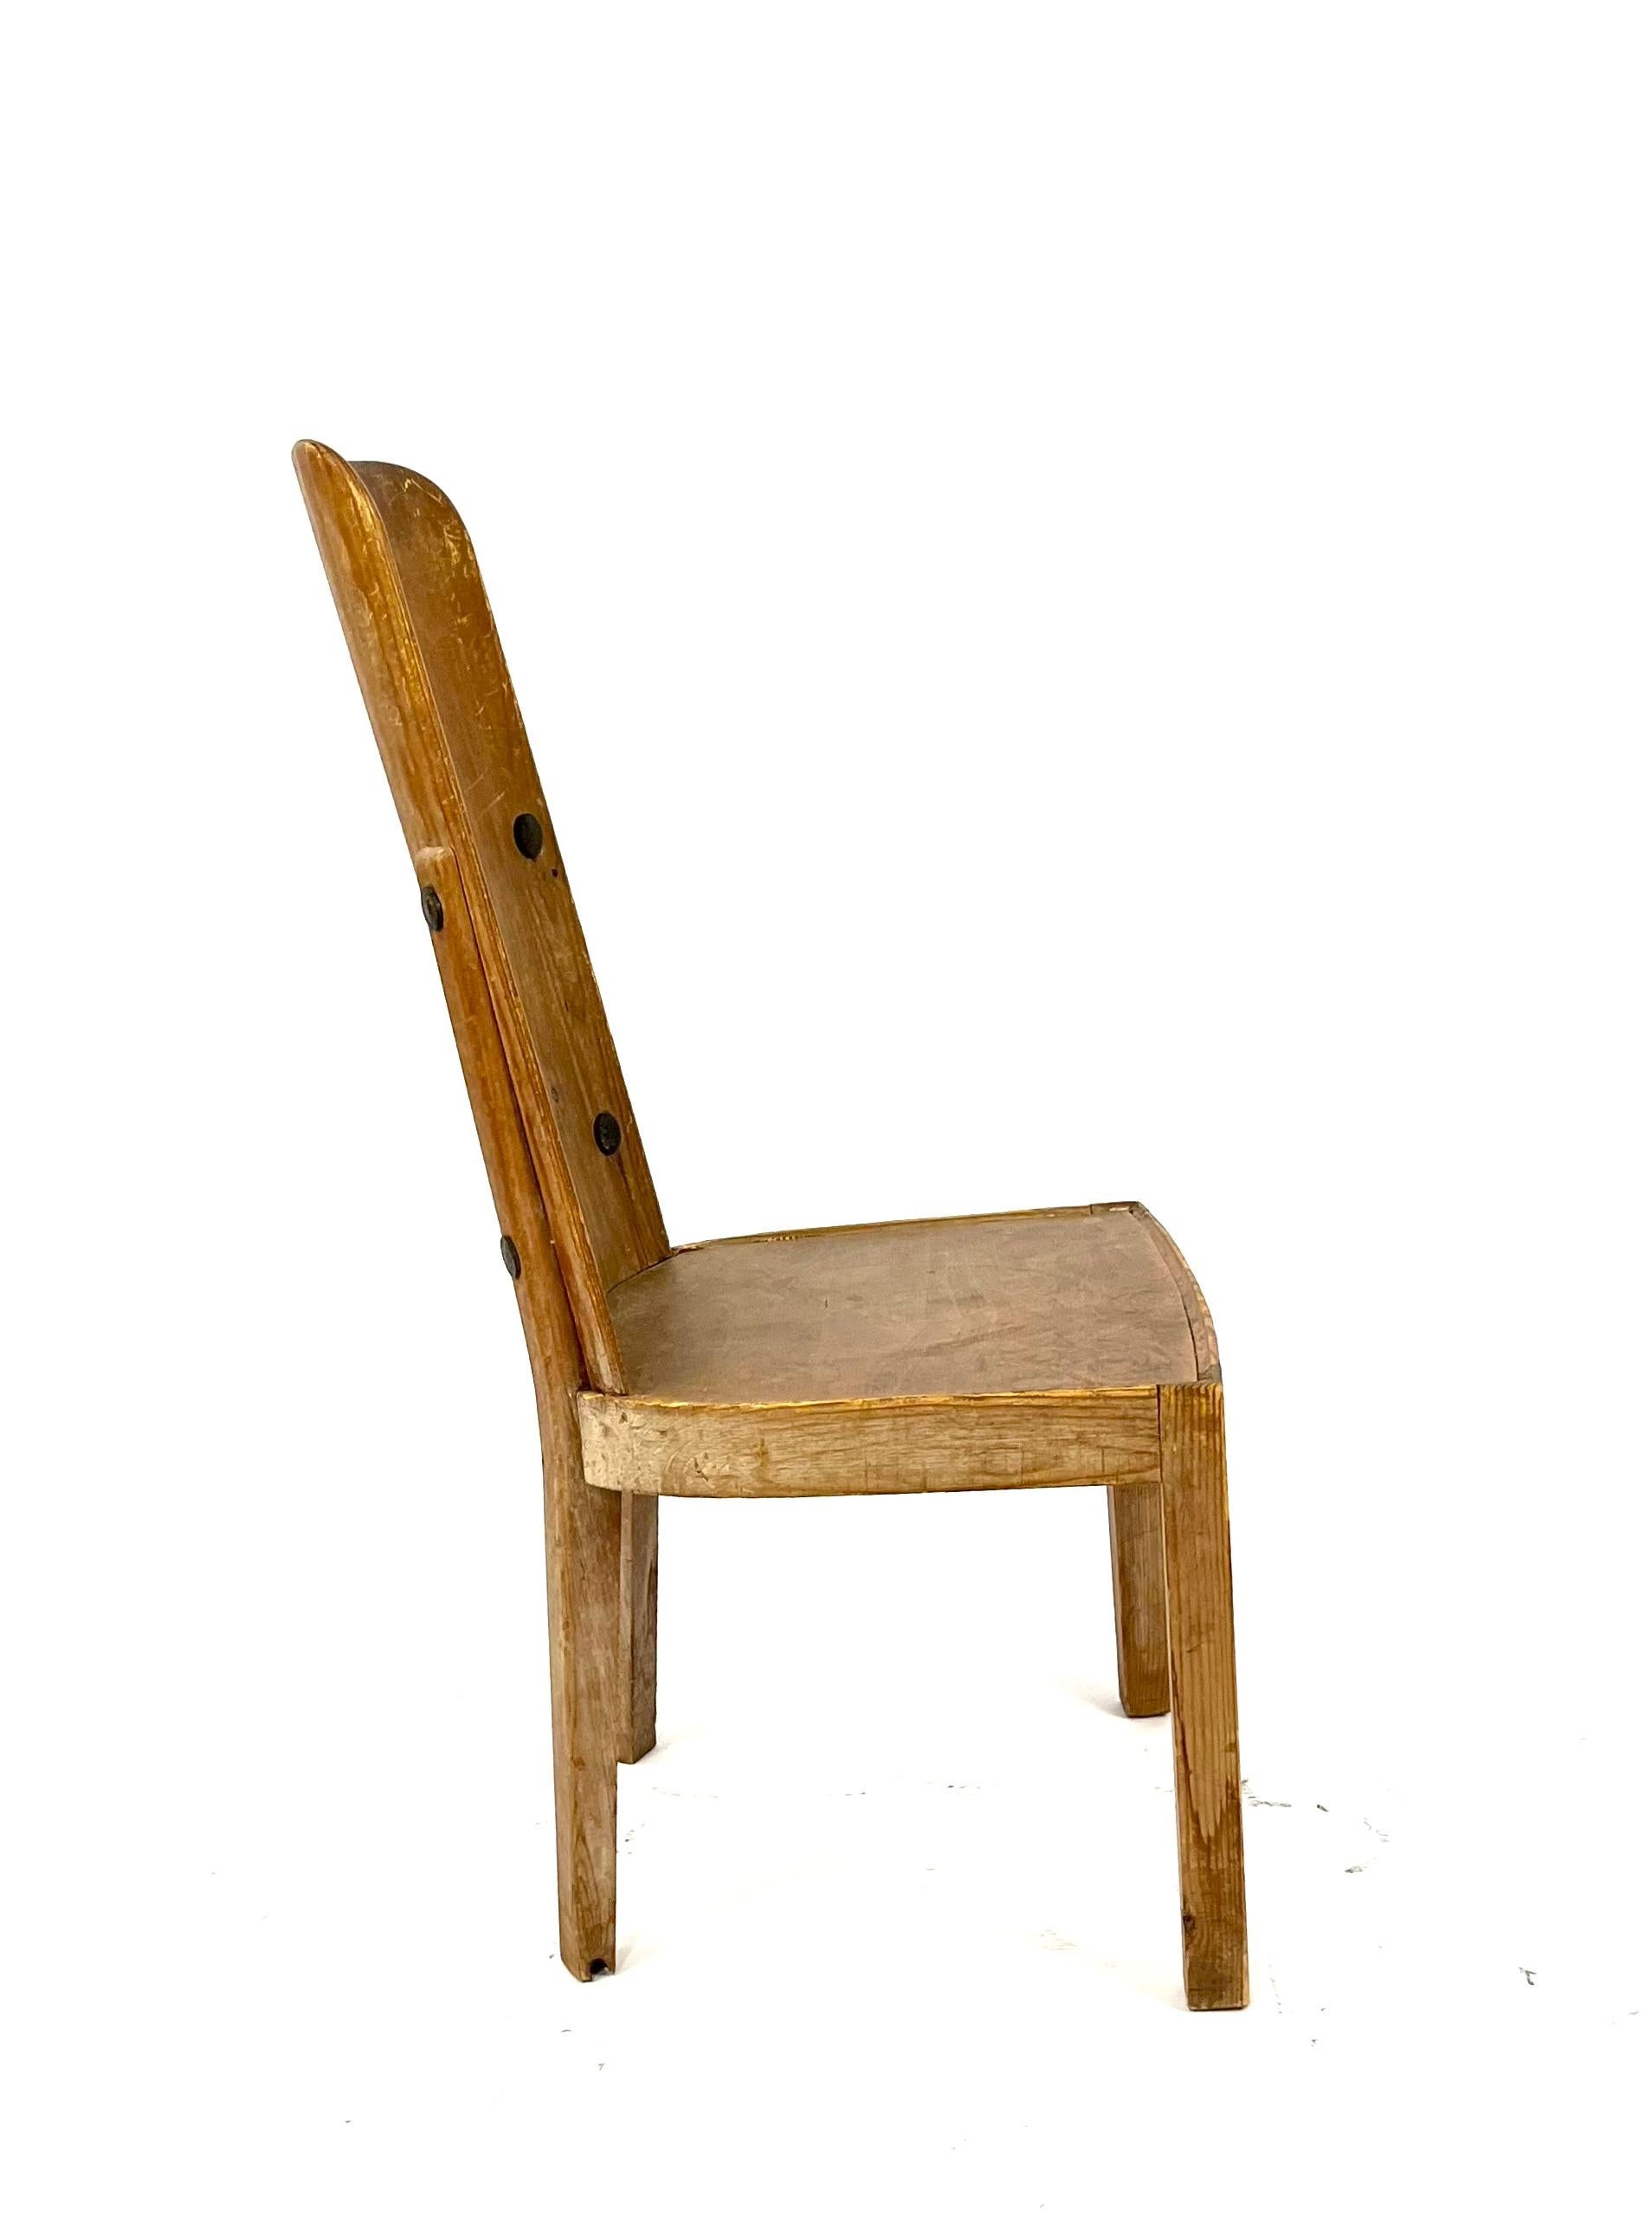 A stained pine 'Lovö' chair by Axel Einar Hjort for Nordiska Kompaniet, Sweden 1930s.

Iron mounts, high back. Height 95 cm, seat height 41 cm.

Wear and scratches.